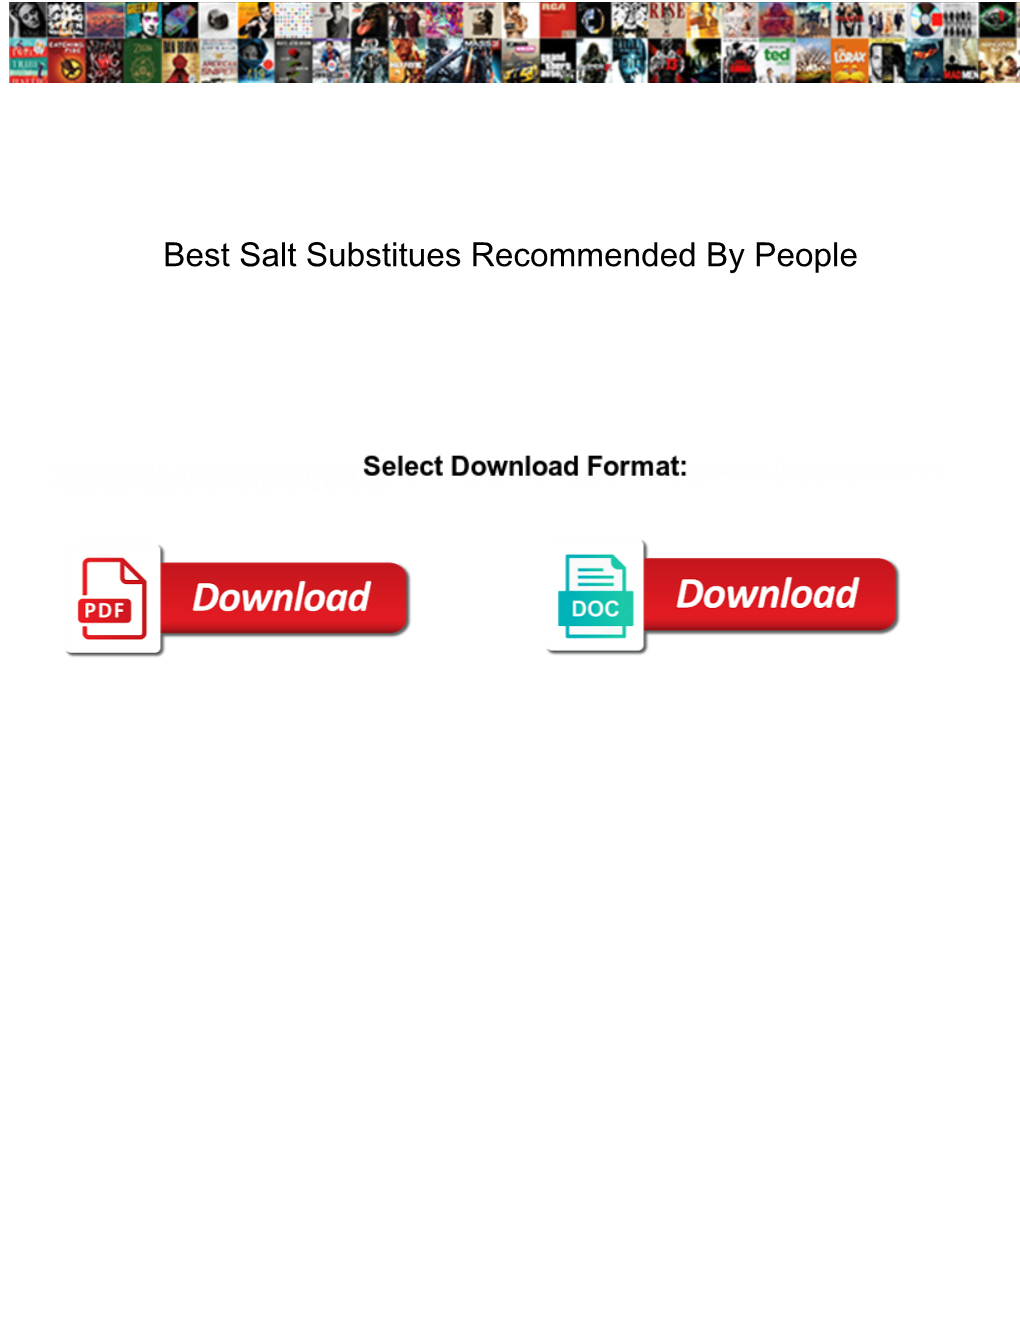 Best Salt Substitues Recommended by People